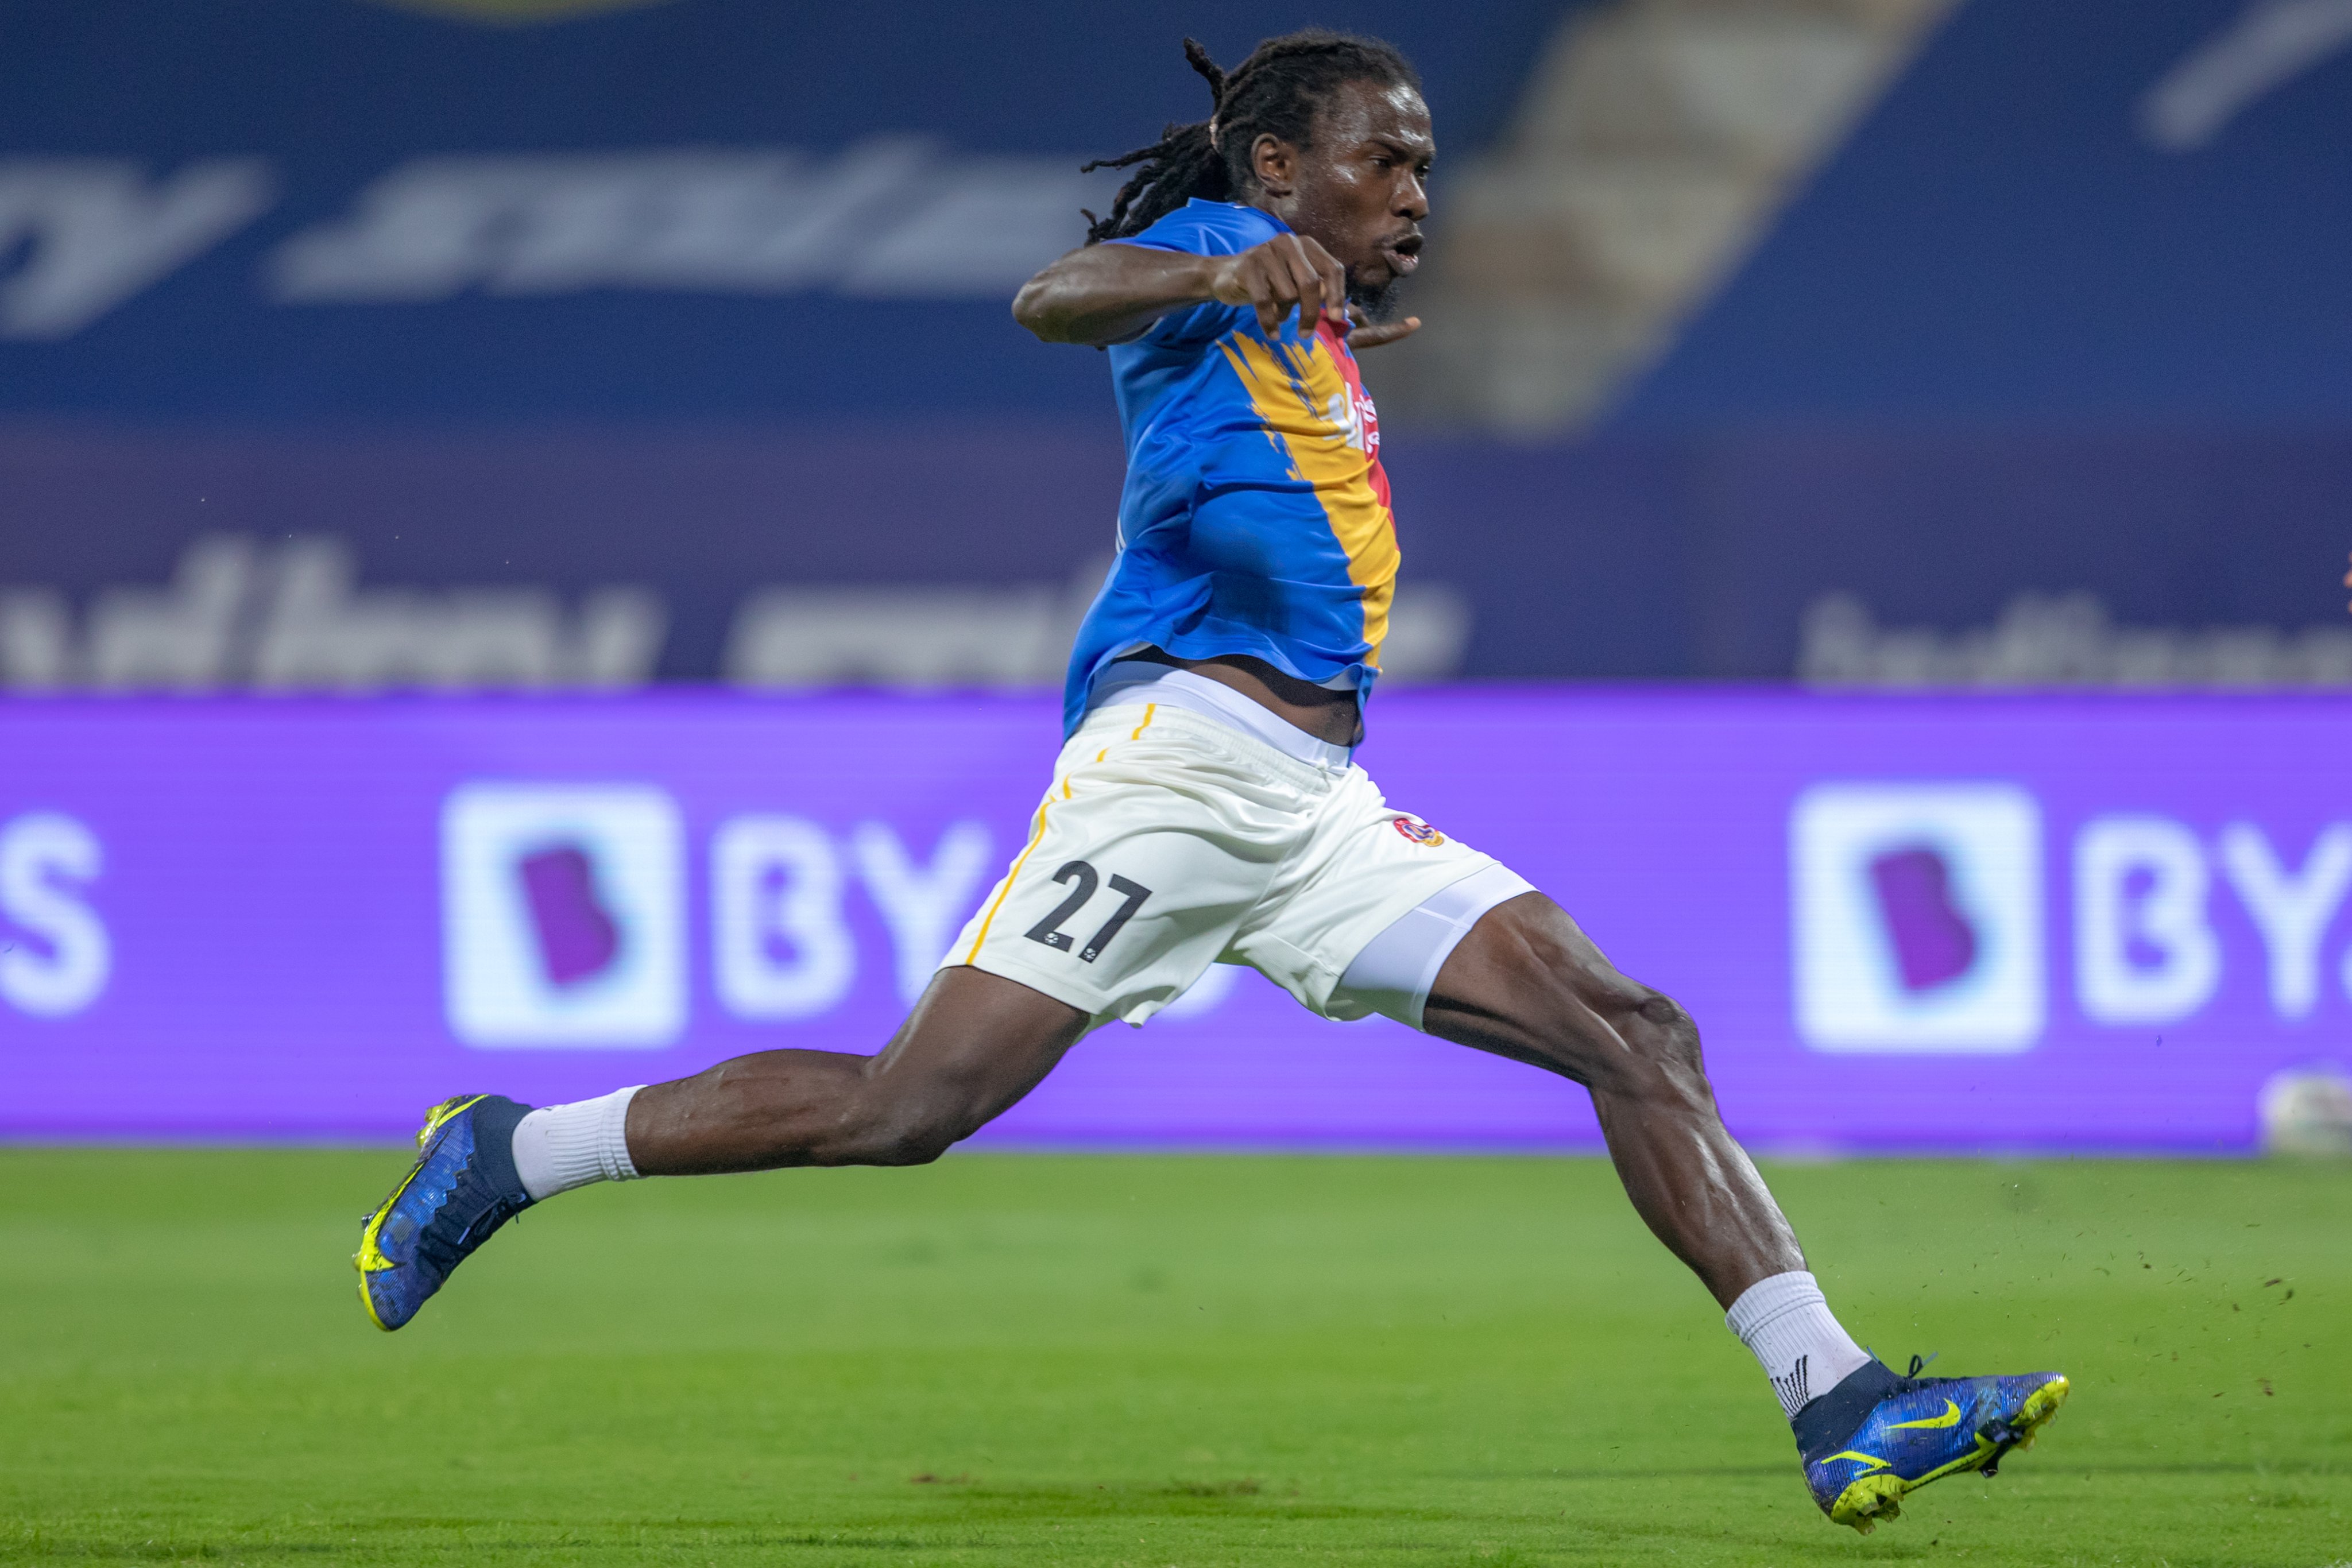 ISL 2021-22: Jamshedpur FC all set to sign former SC East Bengal striker Daniel Chima Chukwu as Nerijus Valskis replacement